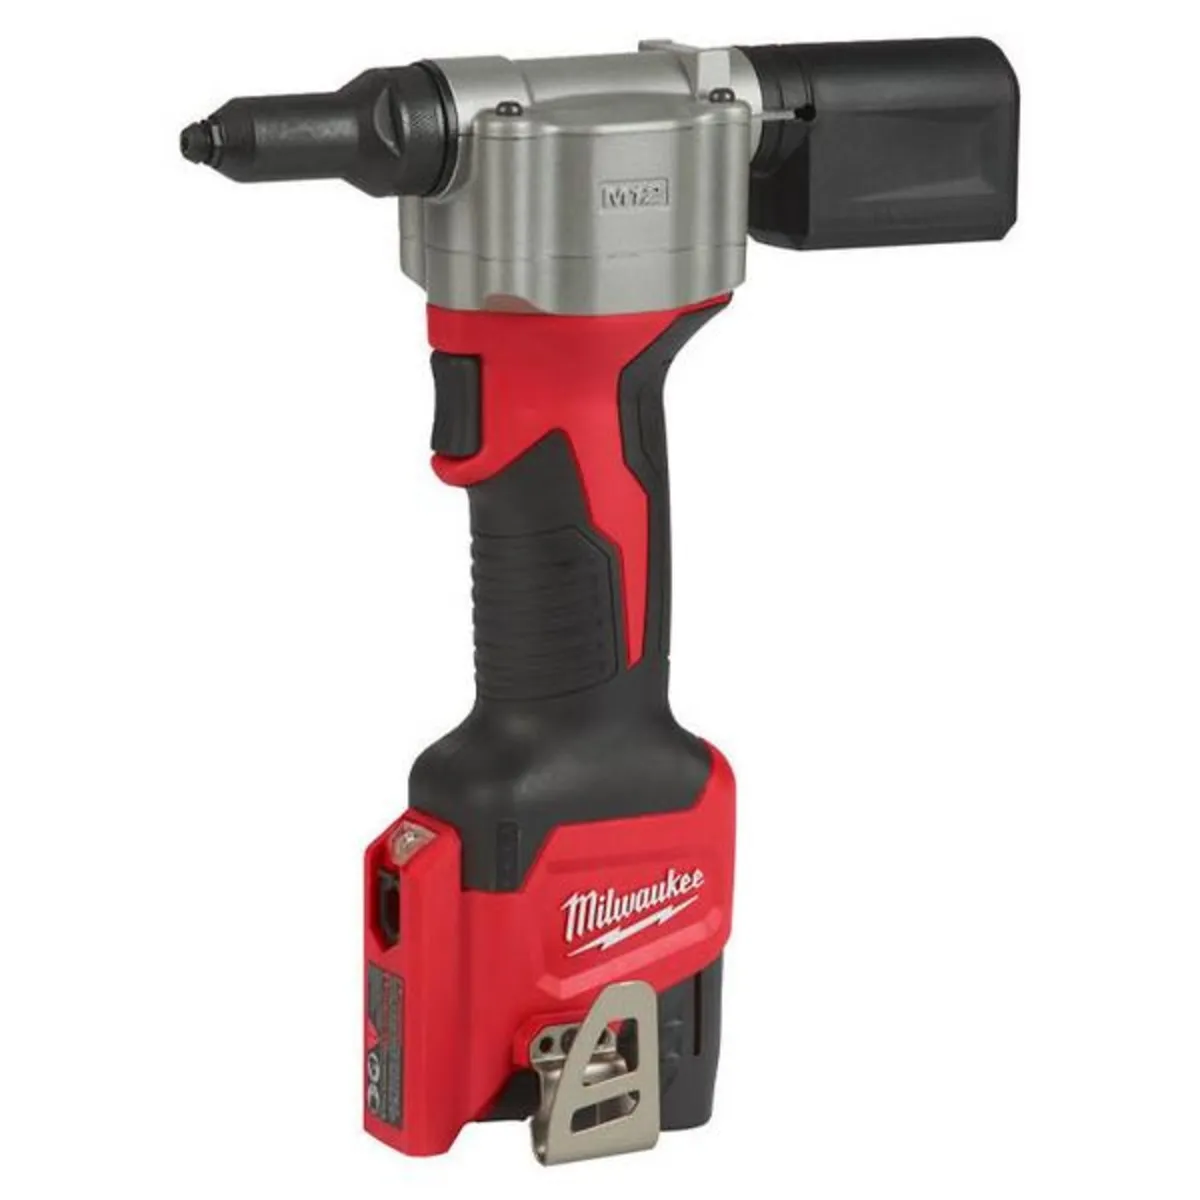 Milwaukee Rivet Tool c/w Battery & Charger - Image 1